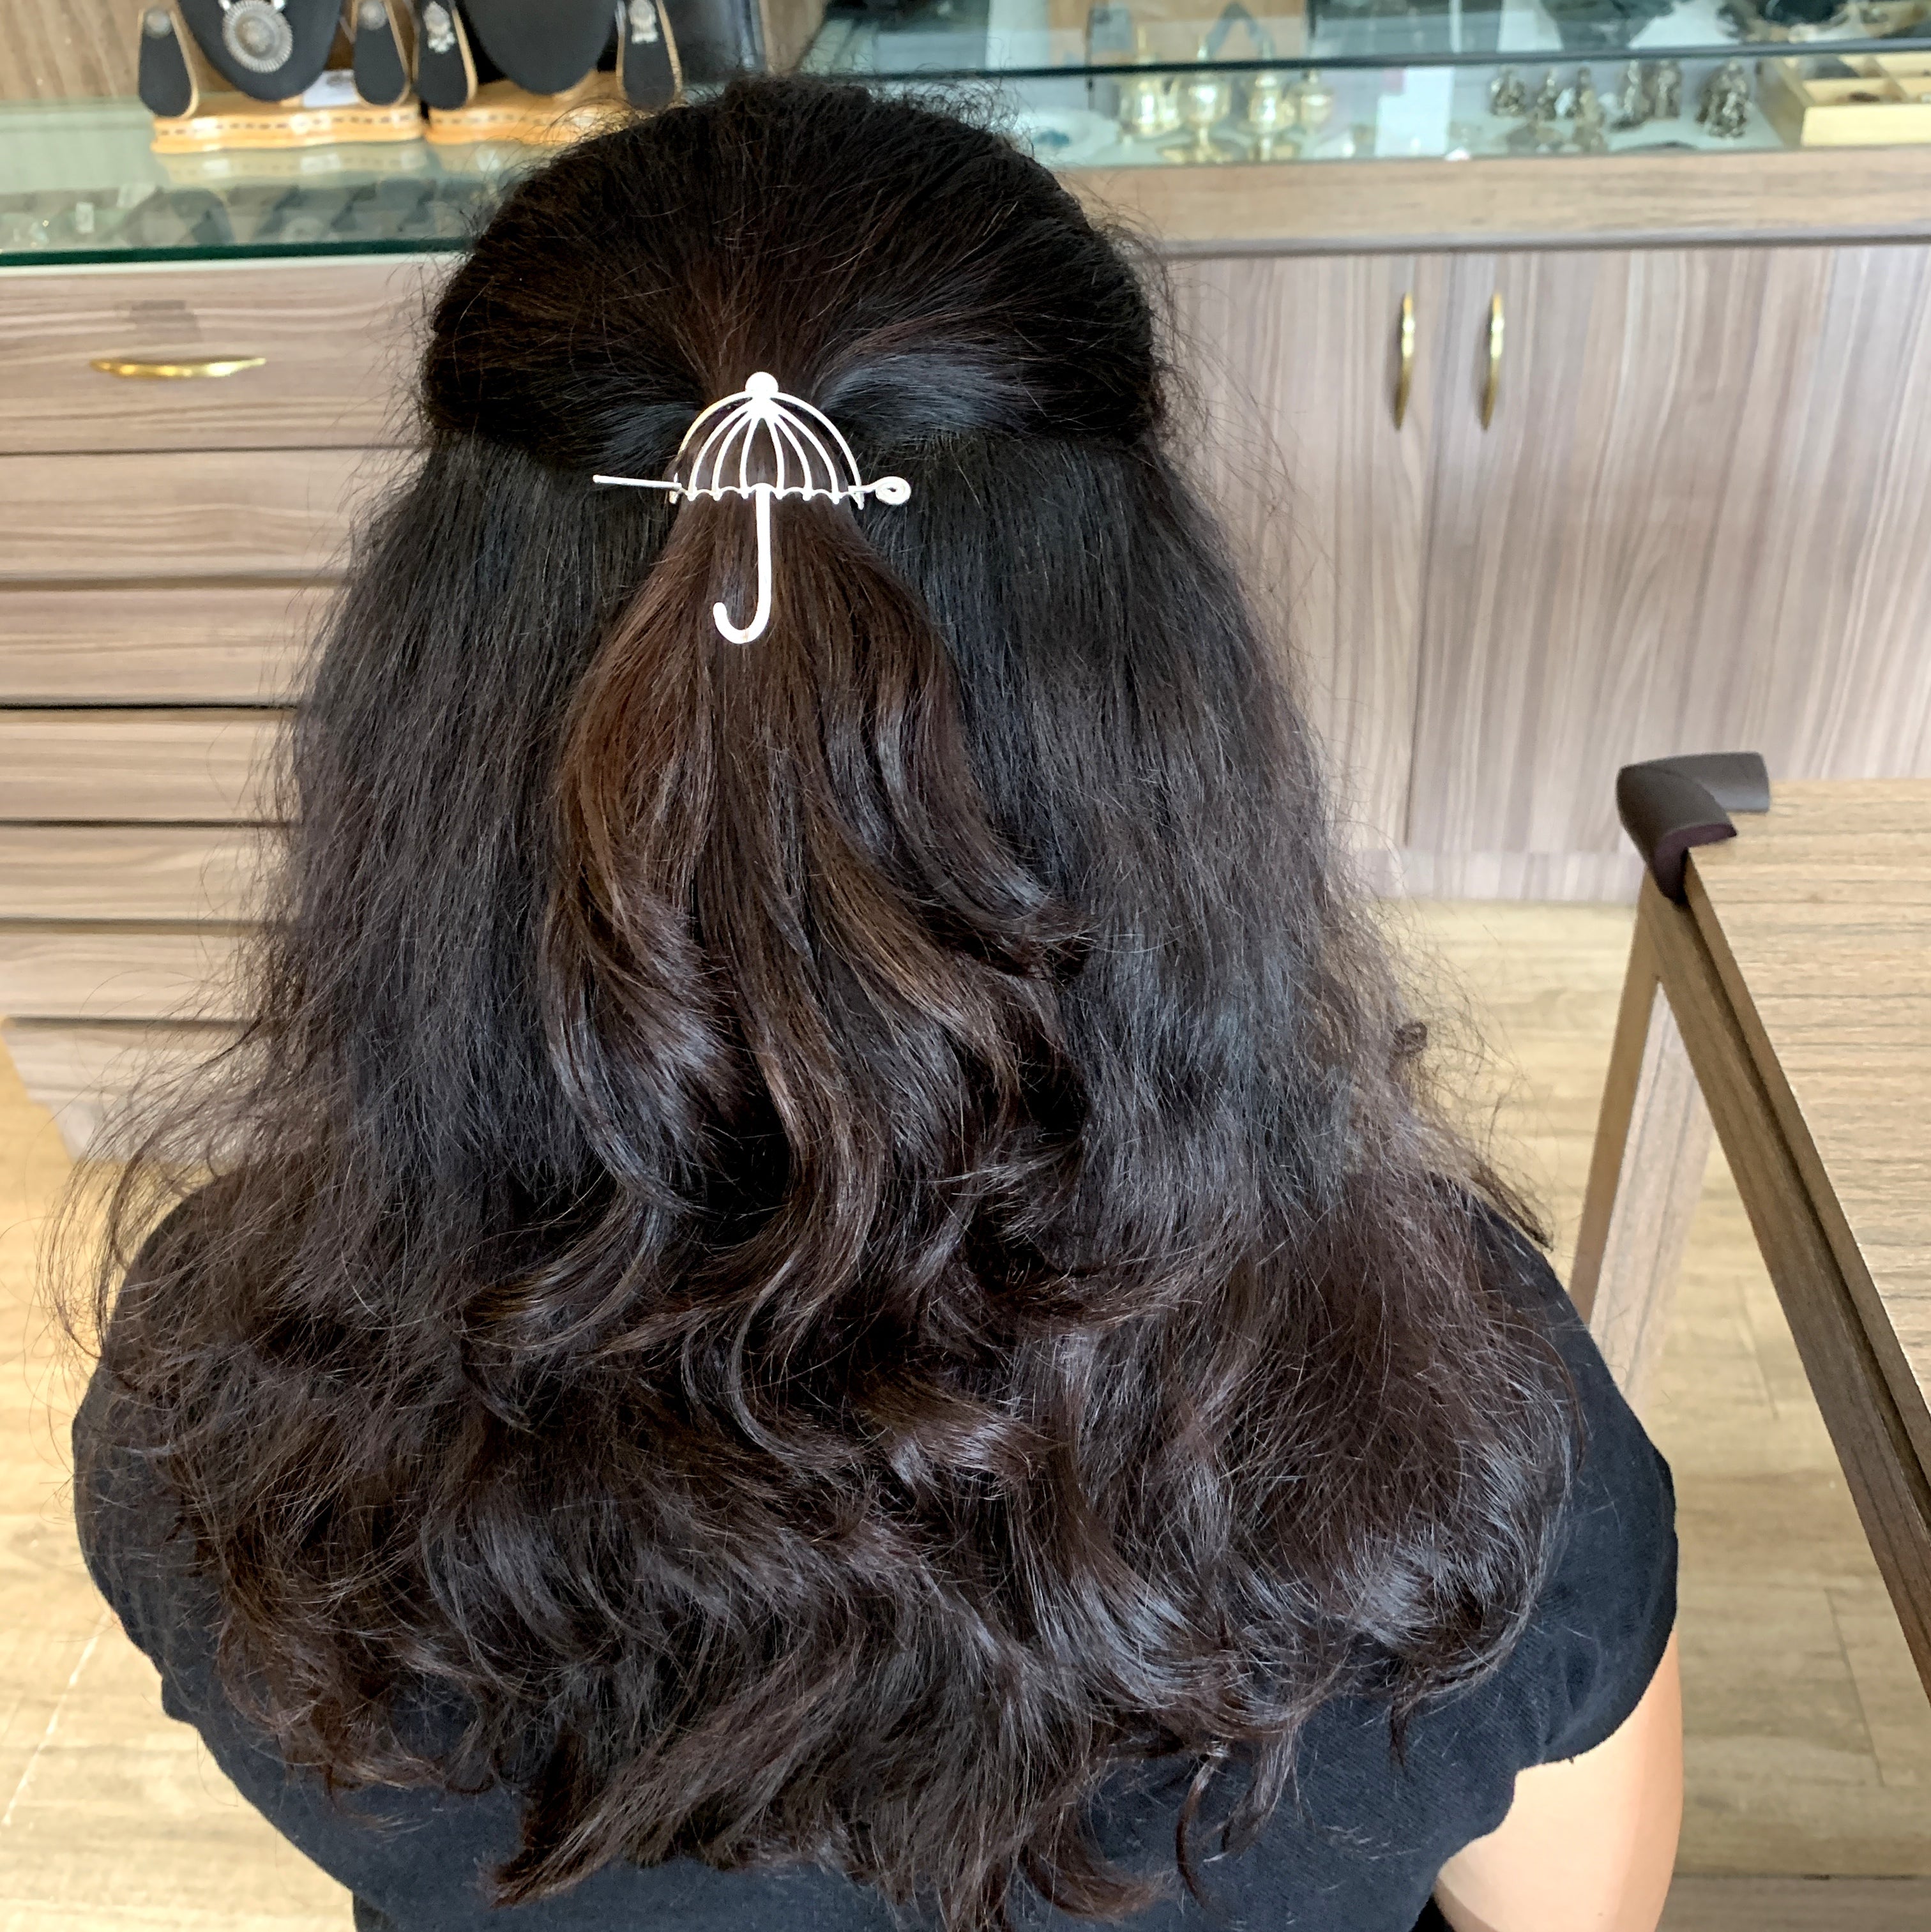 the back of a woman's head with an umbrella hair clip